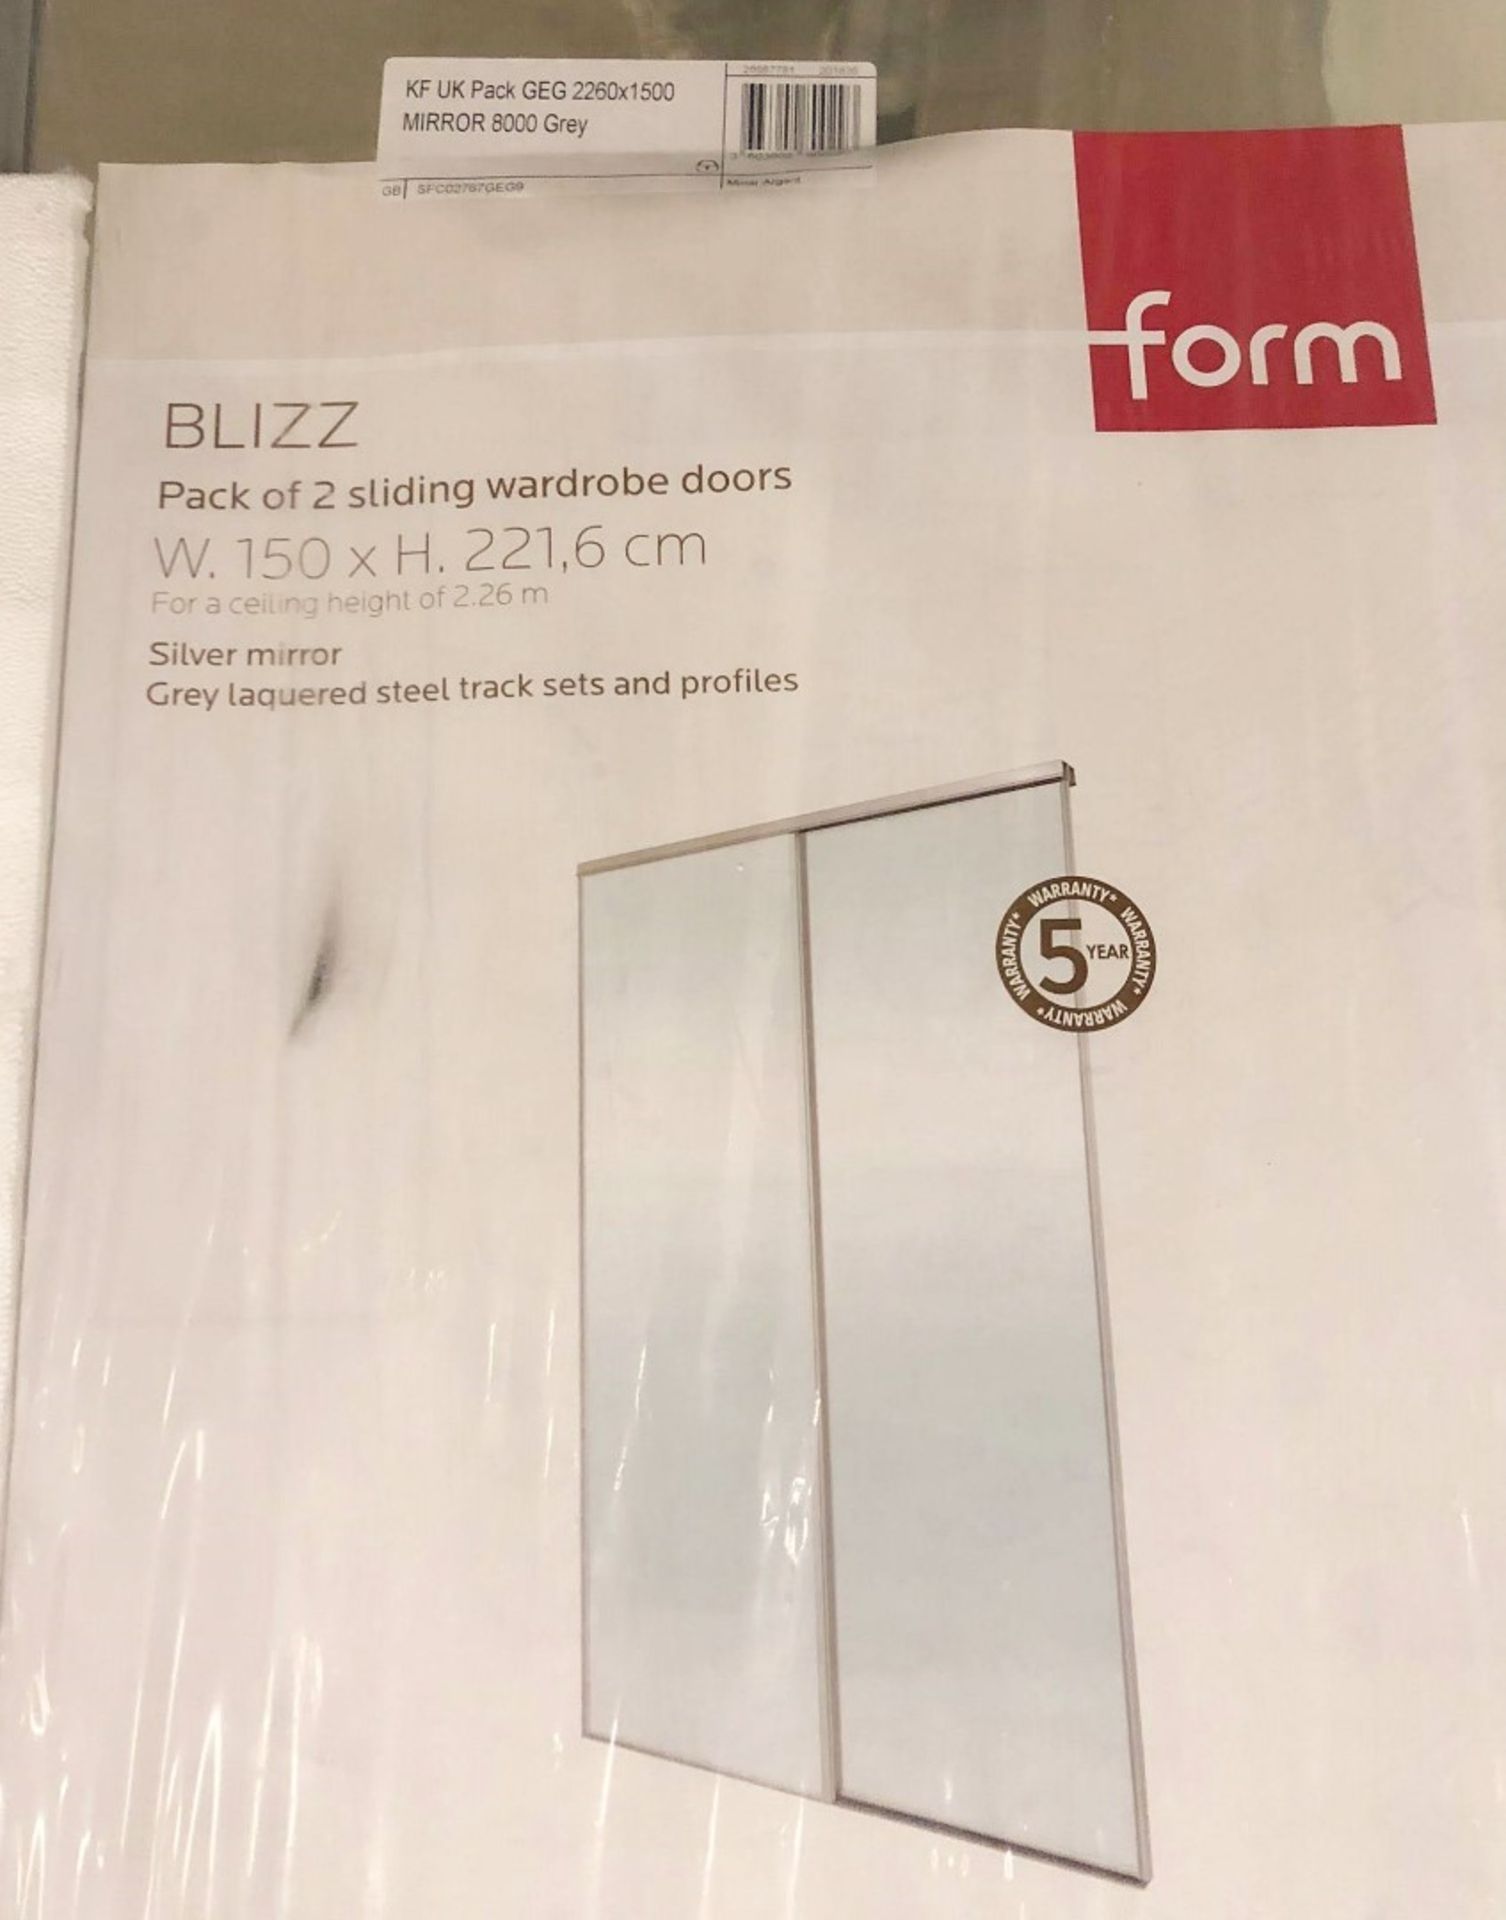 1 x BLIZZ Pack of 2 Silver Mirror Sliding Wardrobe Doors With Grey Lacquered Steel Track Sets and Pr - Image 3 of 4